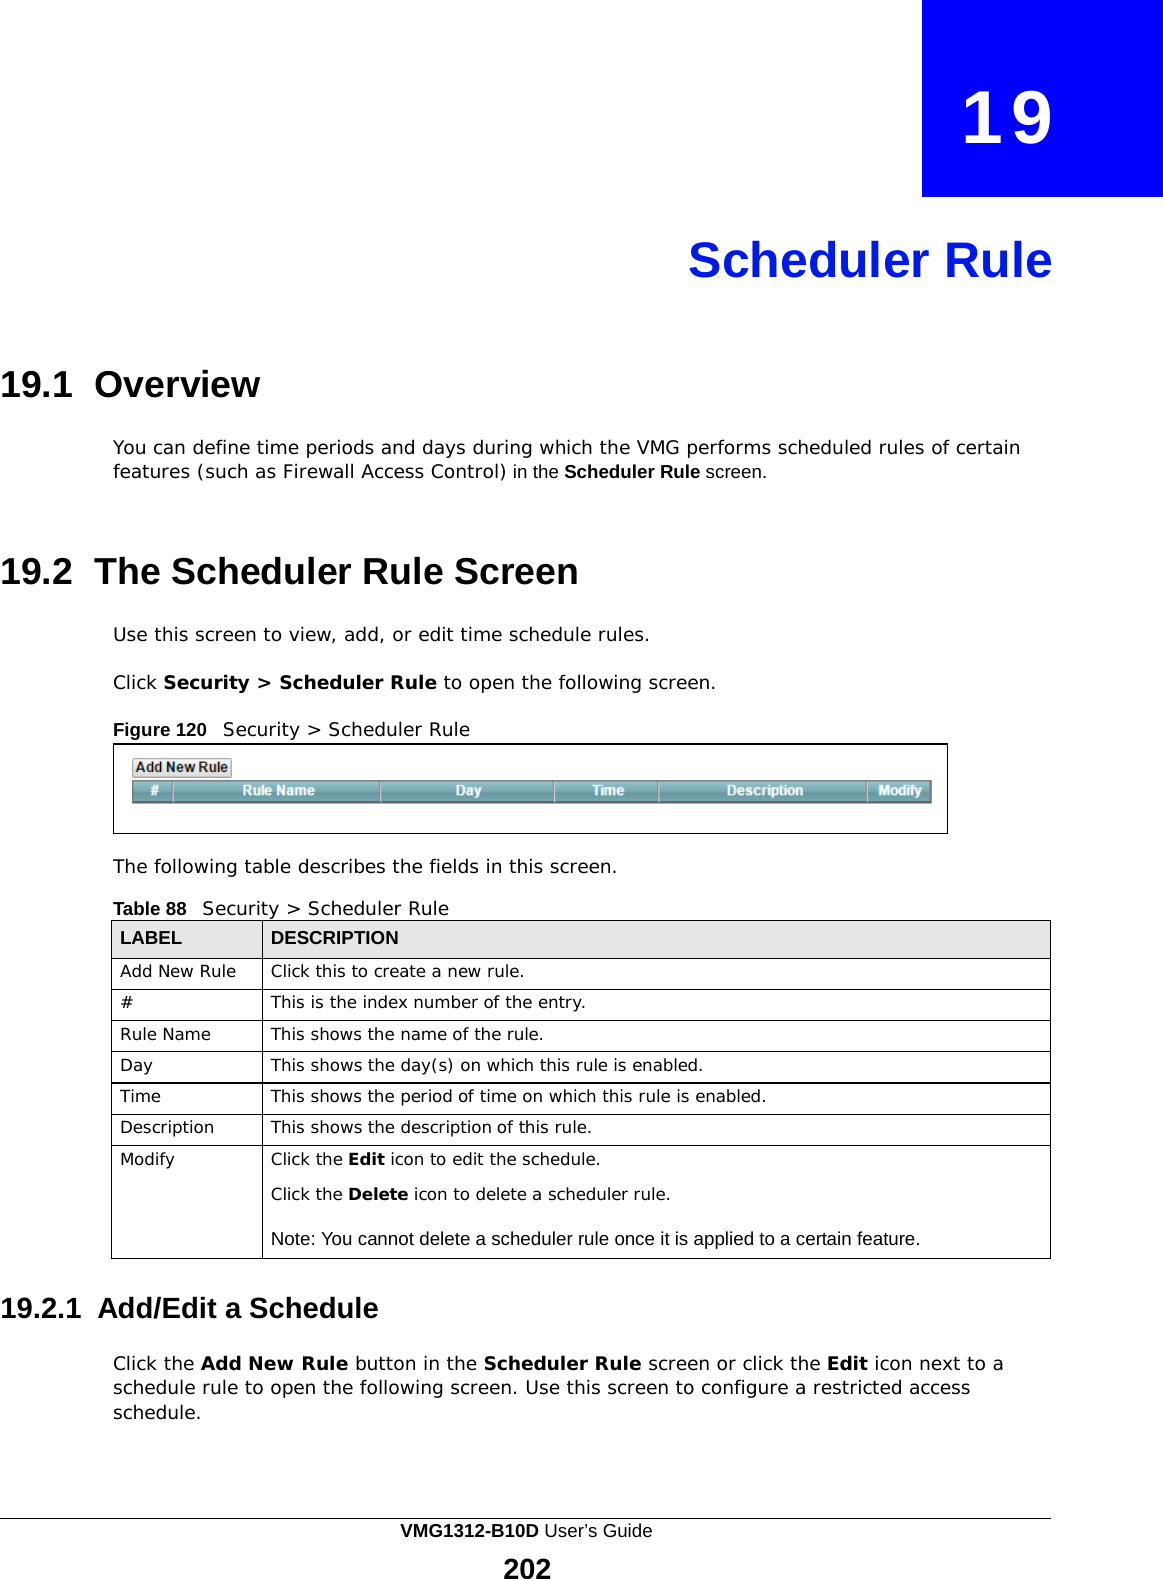    19     Scheduler Rule     19.1 Overview  You can define time periods and days during which the VMG performs scheduled rules of certain features (such as Firewall Access Control) in the Scheduler Rule screen.    19.2 The Scheduler Rule Screen  Use this screen to view, add, or edit time schedule rules.  Click Security &gt; Scheduler Rule to open the following screen.  Figure 120   Security &gt; Scheduler Rule      The following table describes the fields in this screen.  Table 88   Security &gt; Scheduler Rule  LABEL DESCRIPTION Add New Rule Click this to create a new rule. # This is the index number of the entry. Rule Name This shows the name of the rule. Day This shows the day(s) on which this rule is enabled. Time This shows the period of time on which this rule is enabled. Description This shows the description of this rule. Modify Click the Edit icon to edit the schedule.  Click the Delete icon to delete a scheduler rule.  Note: You cannot delete a scheduler rule once it is applied to a certain feature.  19.2.1 Add/Edit a Schedule  Click the Add New Rule button in the Scheduler Rule screen or click the Edit icon next to a schedule rule to open the following screen. Use this screen to configure a restricted access schedule. VMG1312-B10D User’s Guide 202  